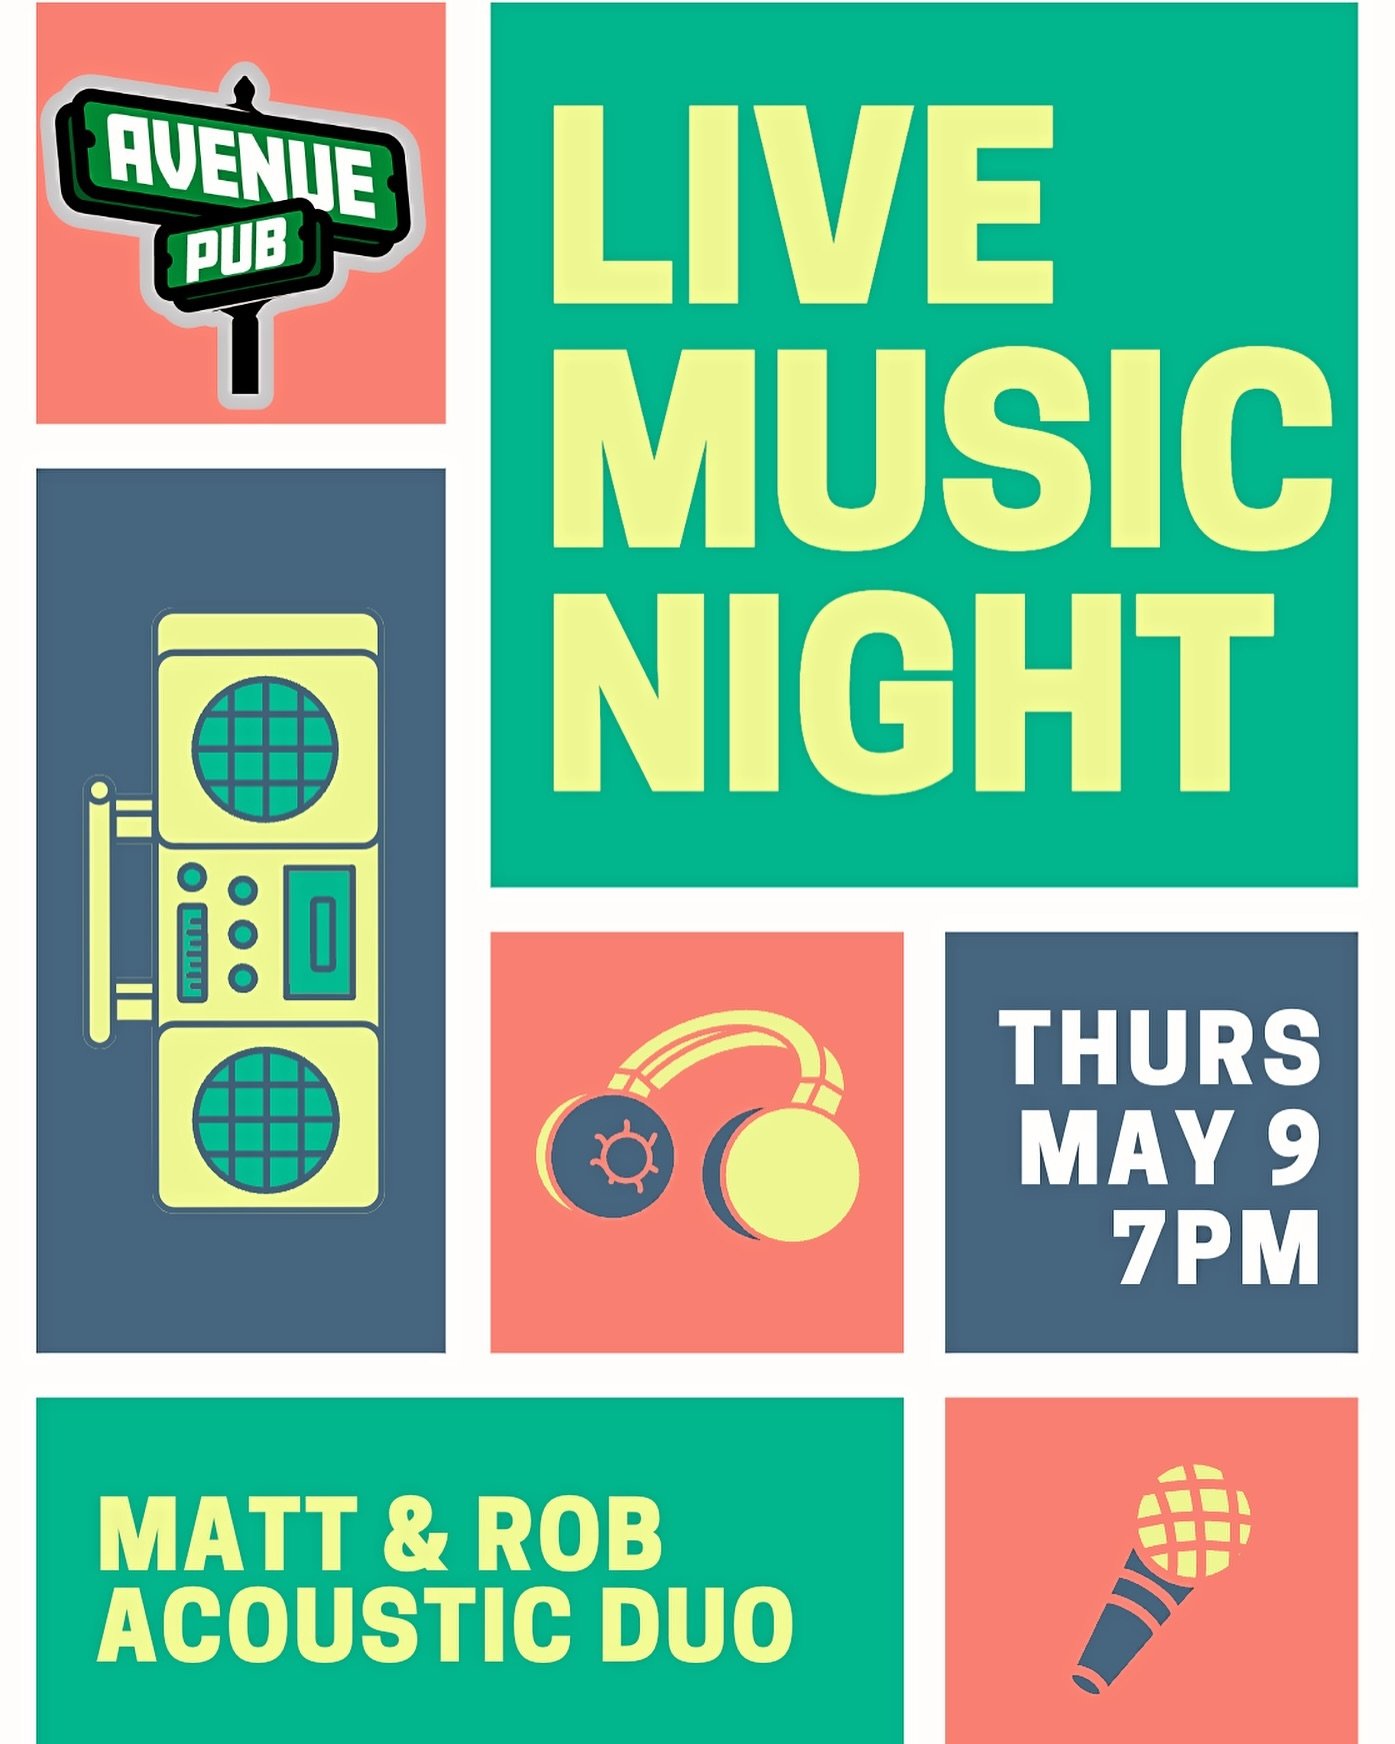 Have you made it out to one of our events yet? Now we have trivia as well as music nights on rotation. Trivia is the third Thursday of the month and music the second Thursday of each month. 📅 🎯 

Our next night of music and fun at the Avenue Pub is